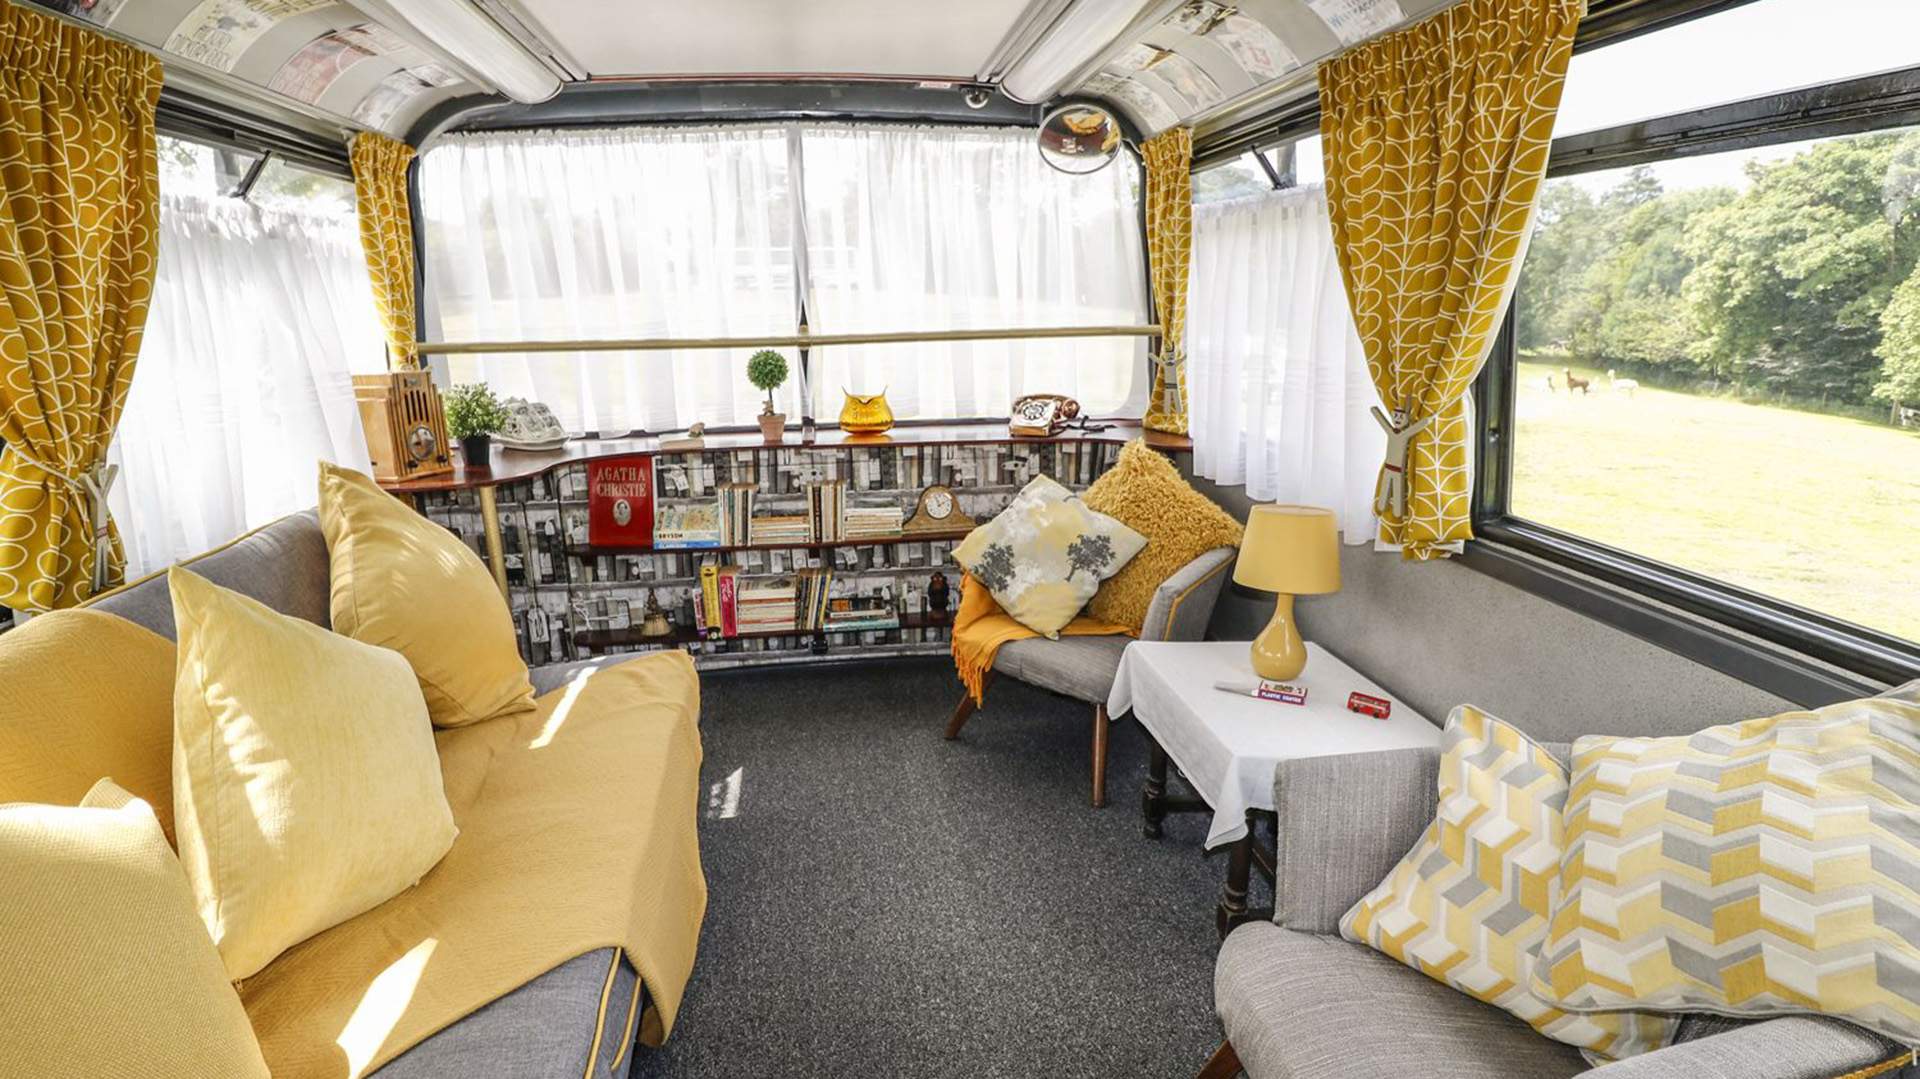 You Can Now Stay In an Agatha Christie-Inspired Hotel Inside a Double Decker Bus